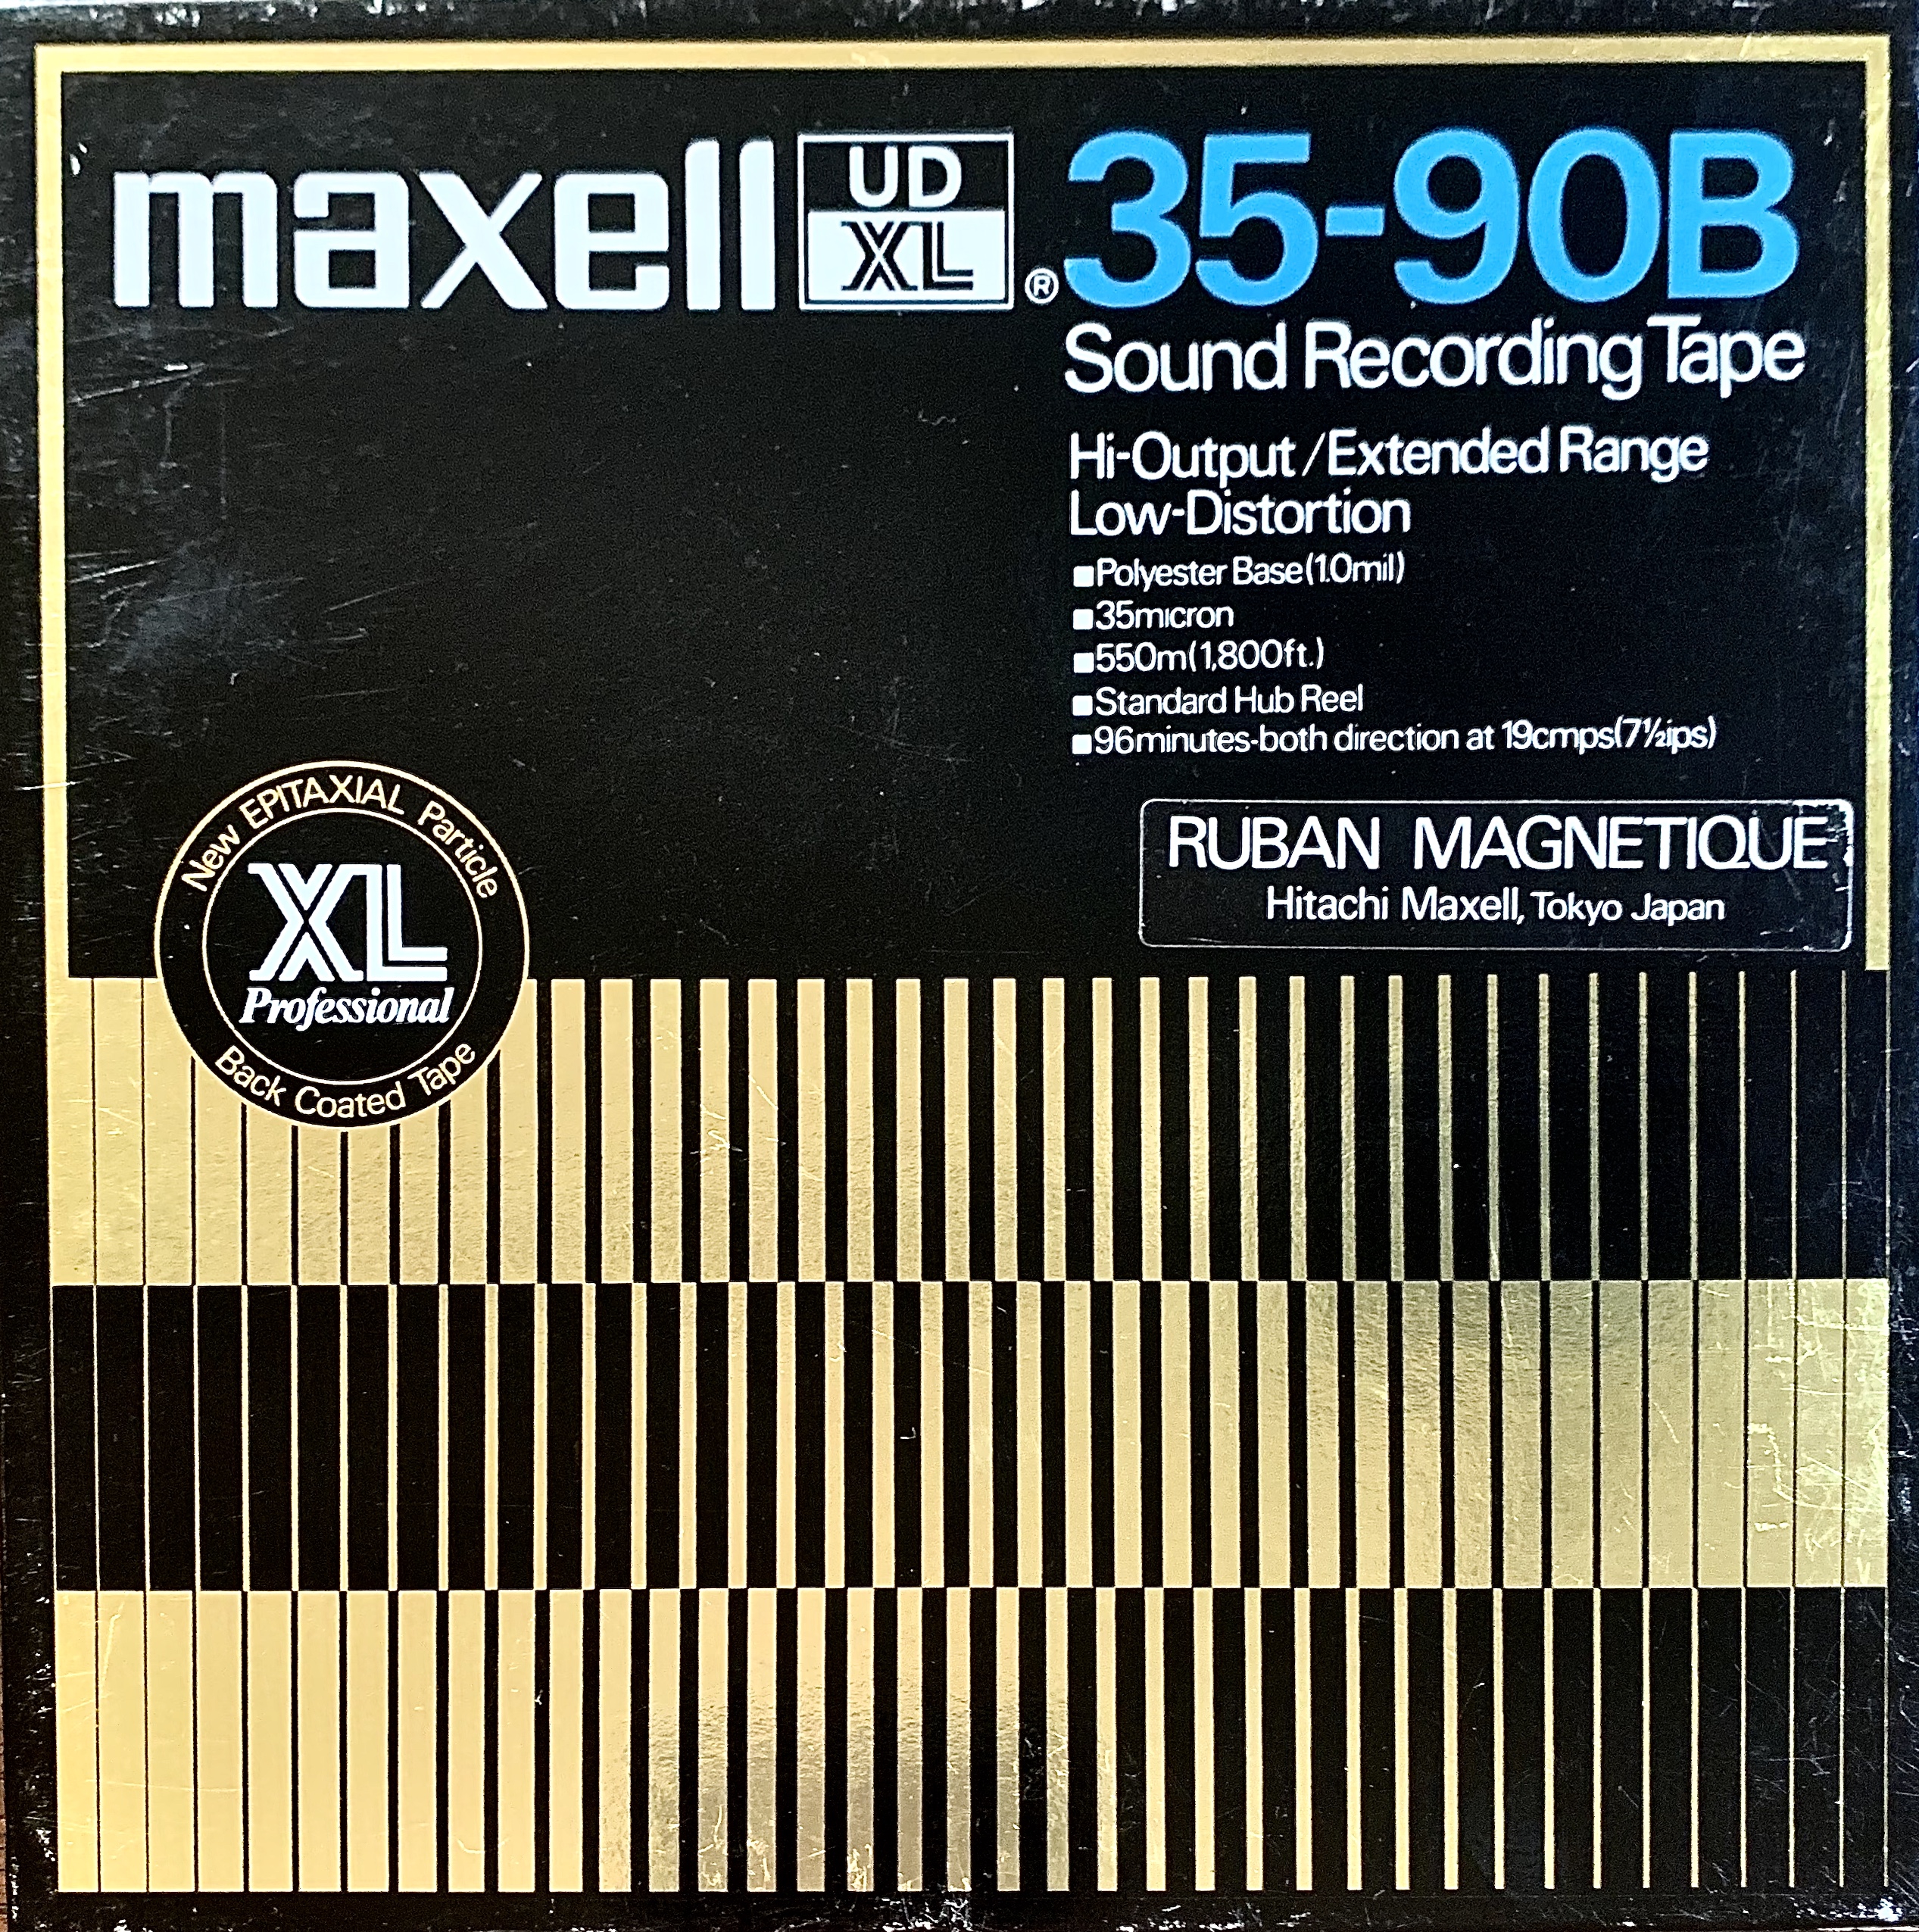 VINTAGE New Old Stock Maxell UD XL 50-120B Sound Recording Tape Hi